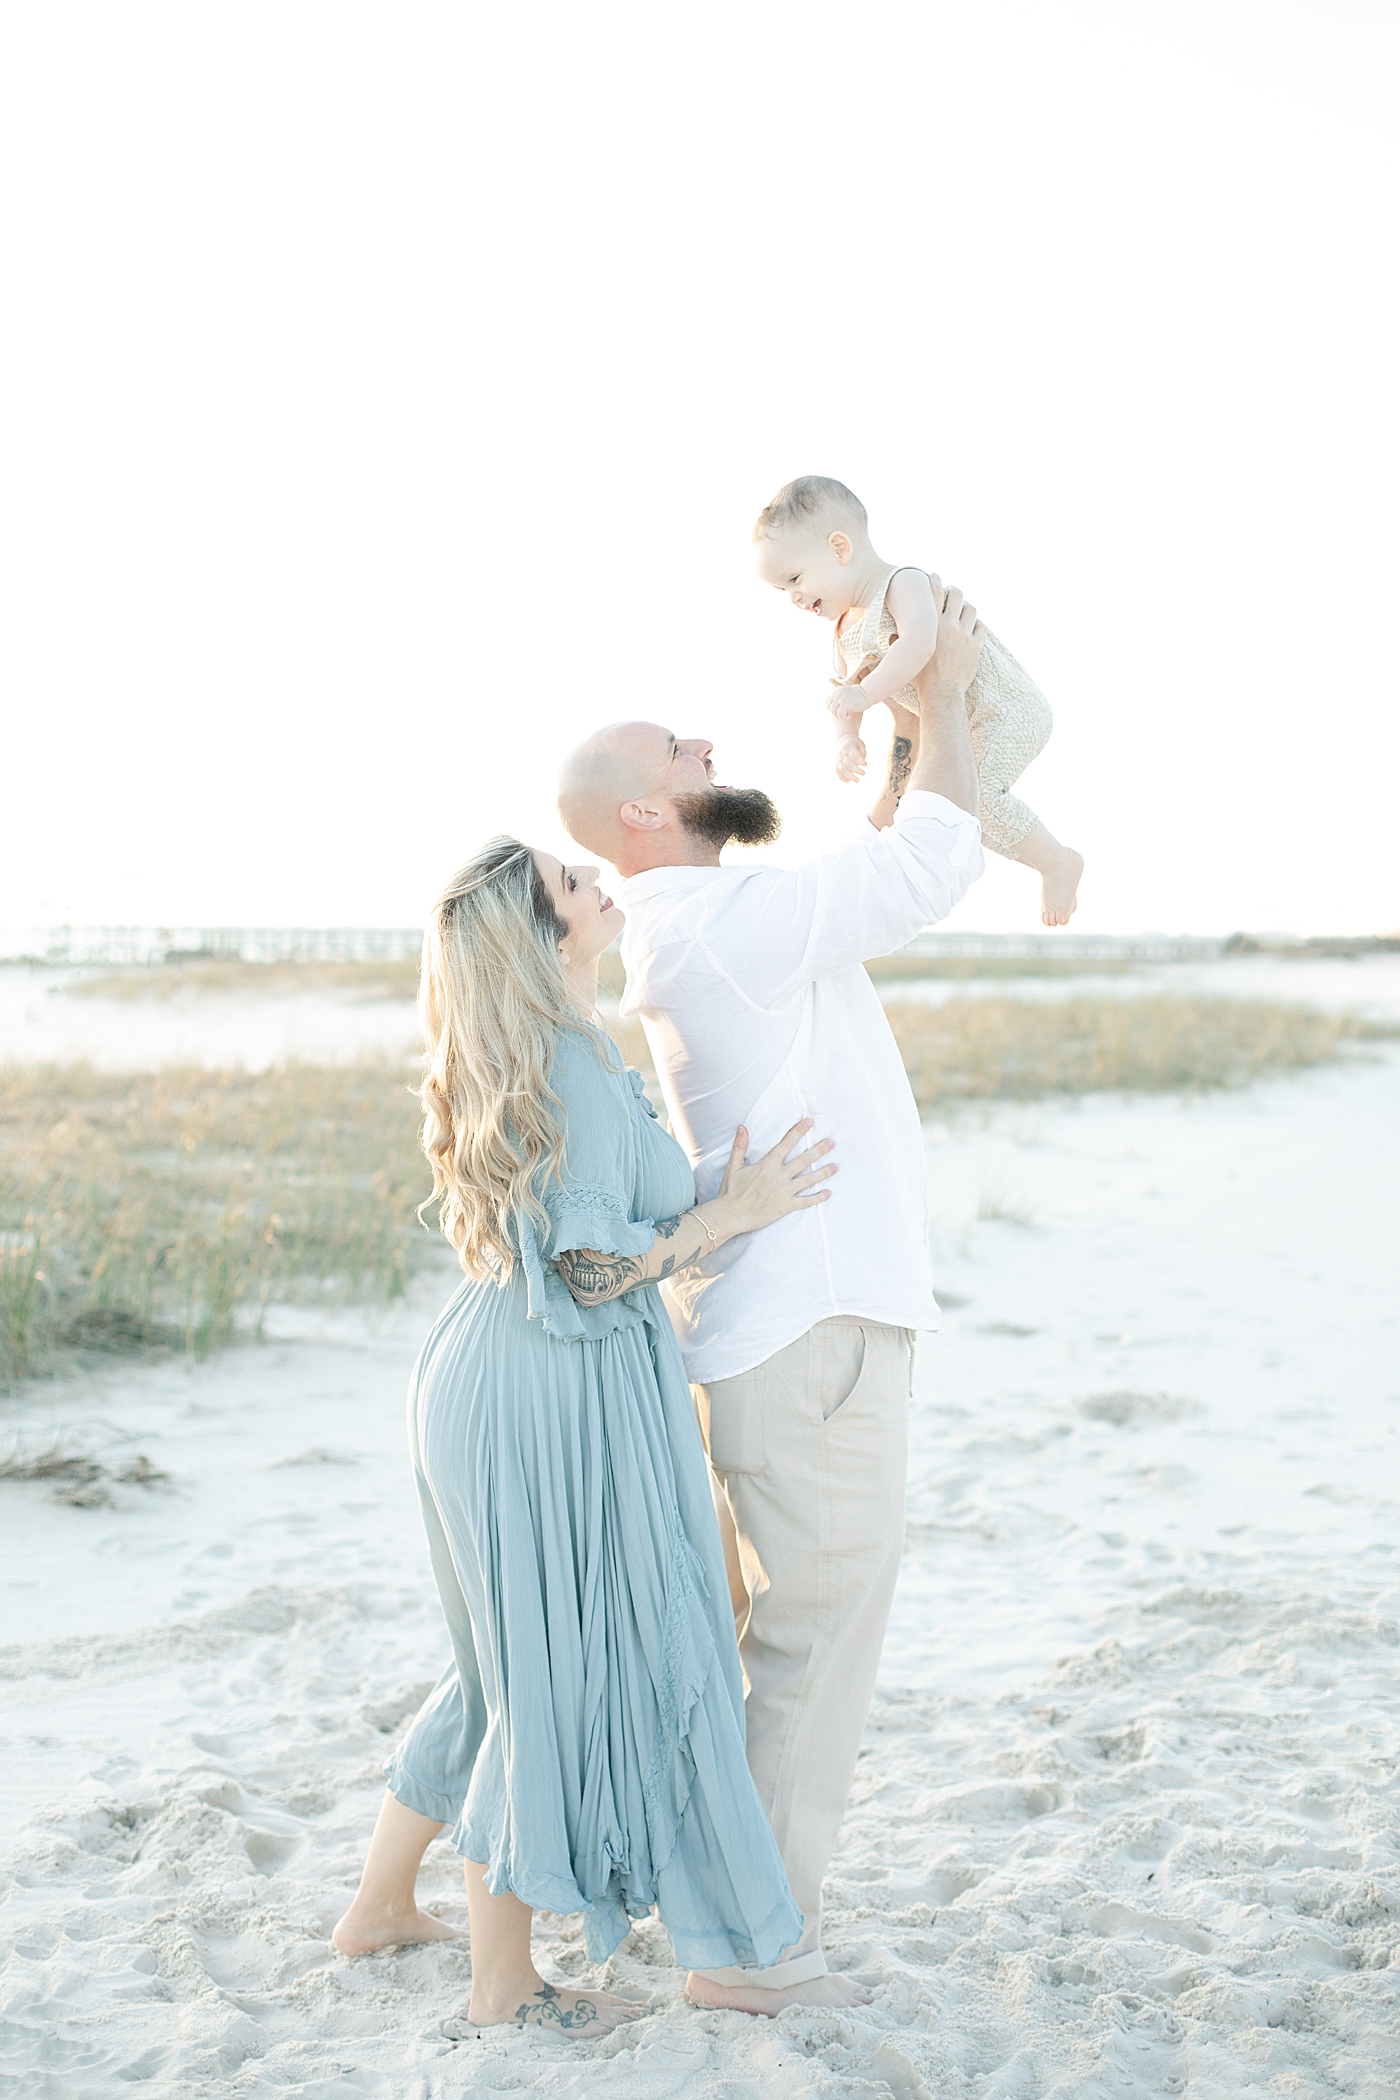 Mom and dad playing with baby on the beach | Photo by Ocean Springs Family Photographer Little Sunshine Photography